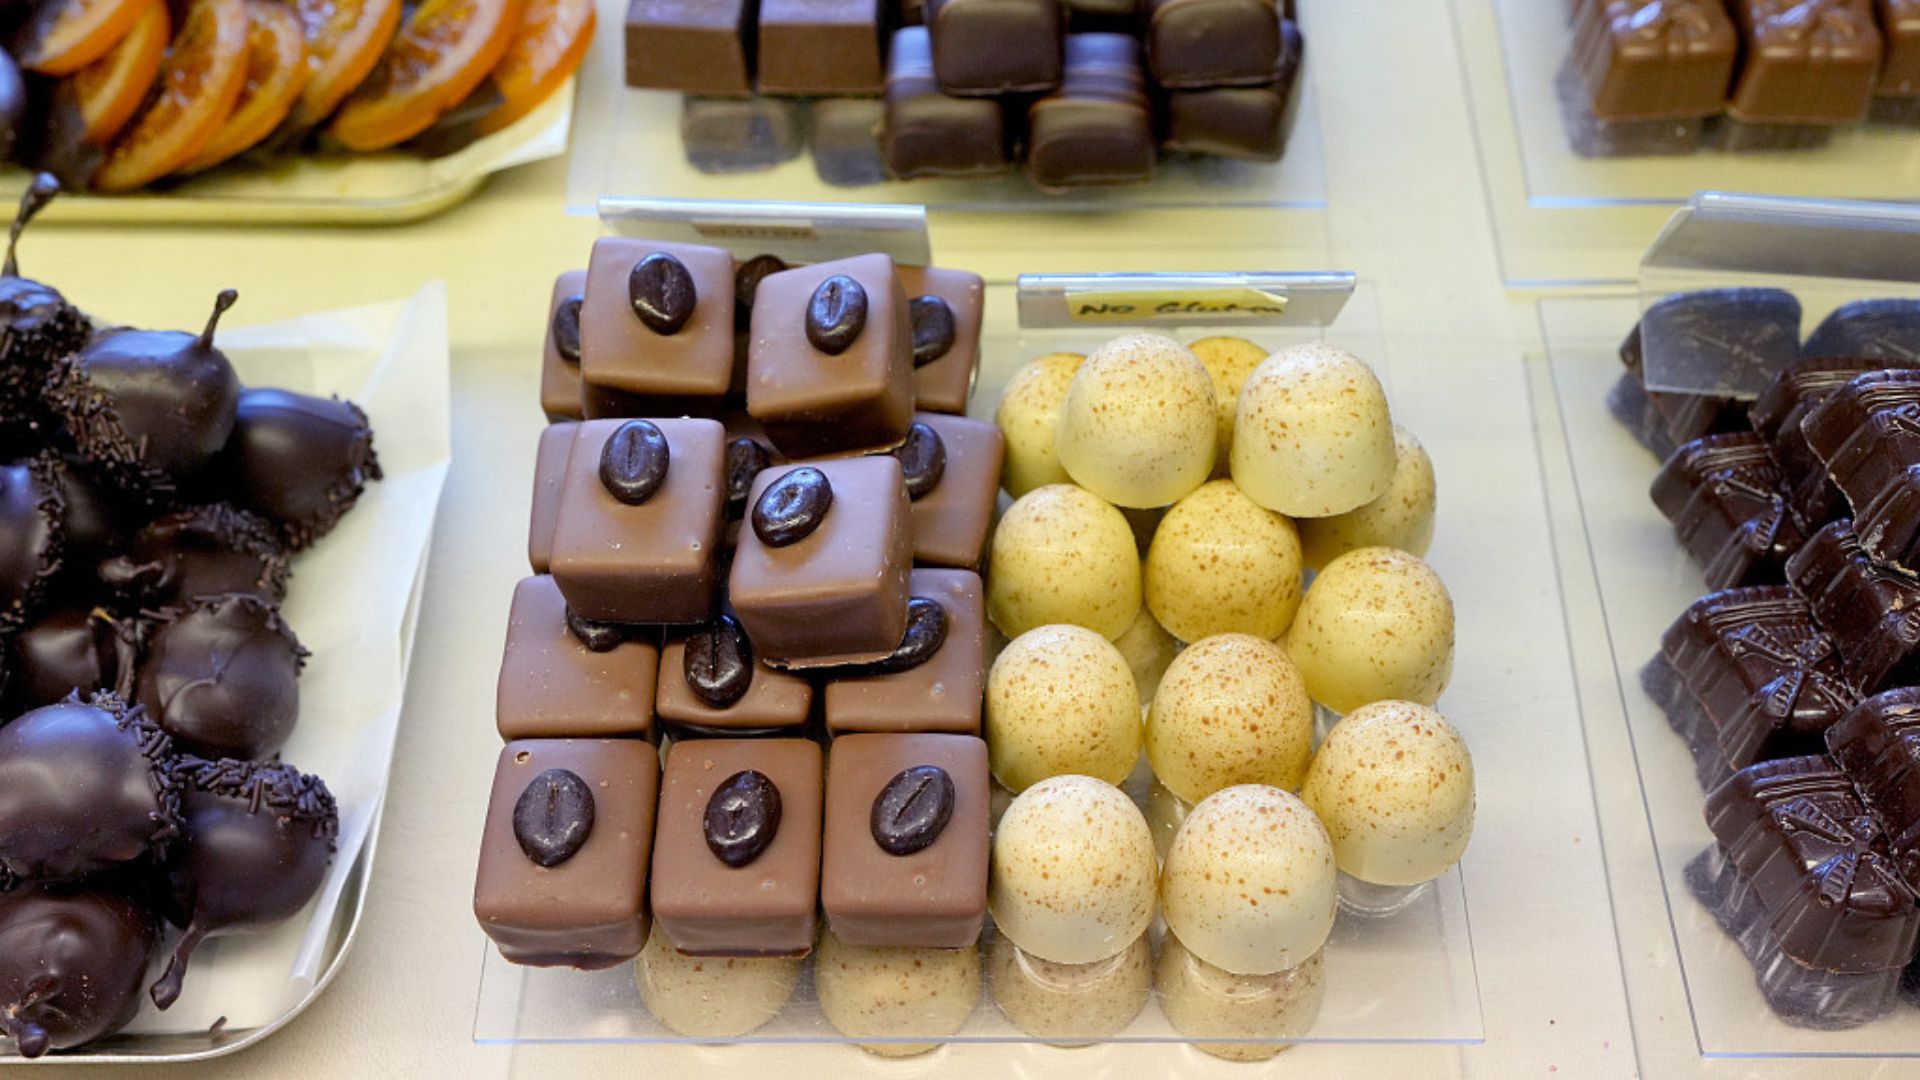 High-end handmade Belgian chocolates at London shop Sandrine are tempting passers-by. /Kirsty Wigglesworth